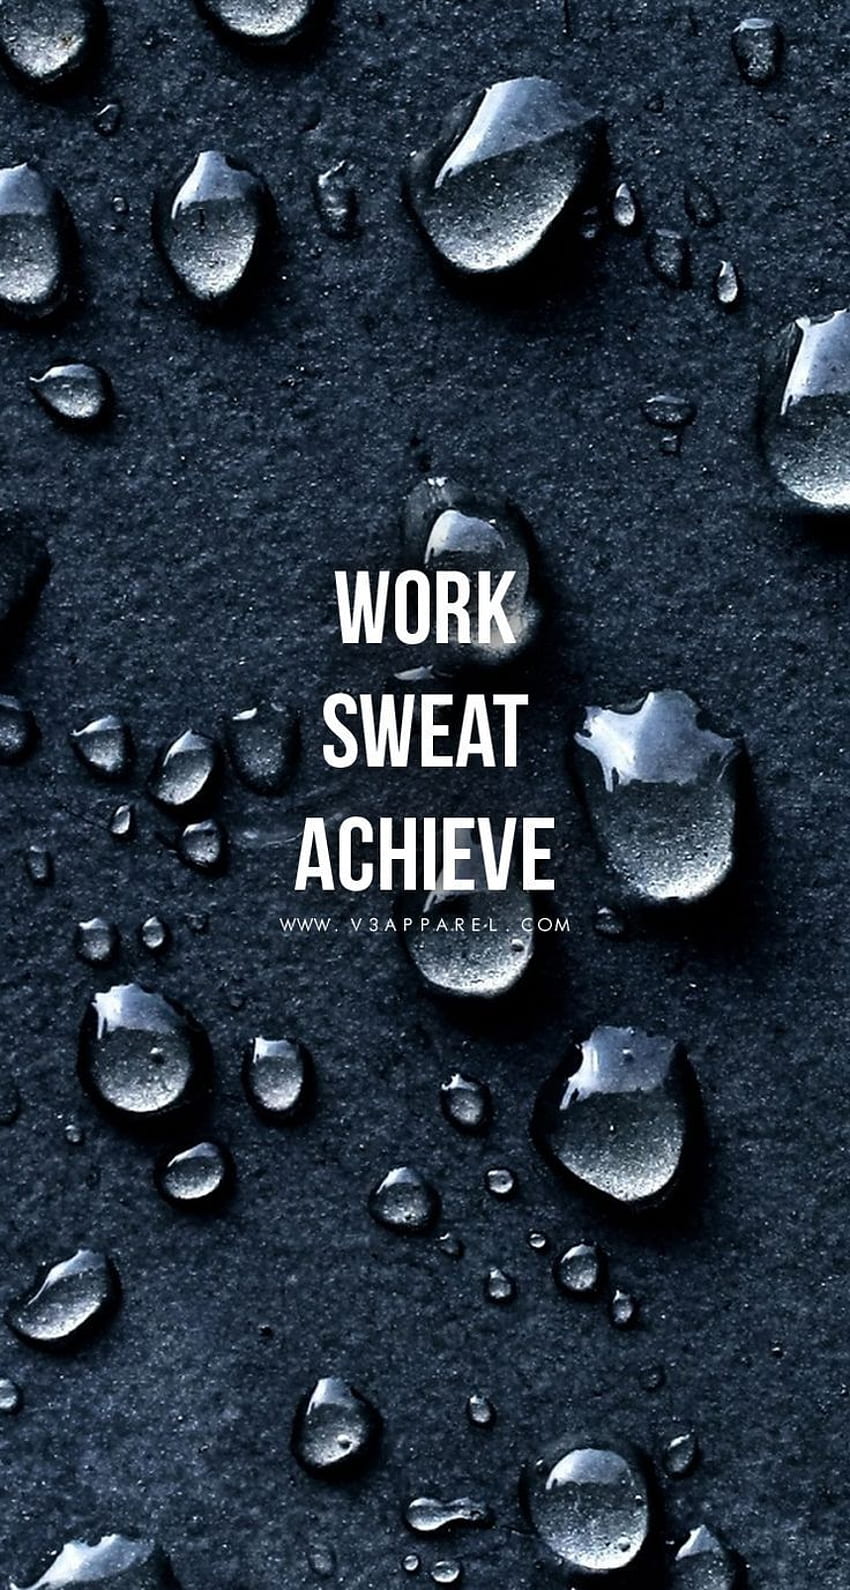 fitness quotes wallpapers